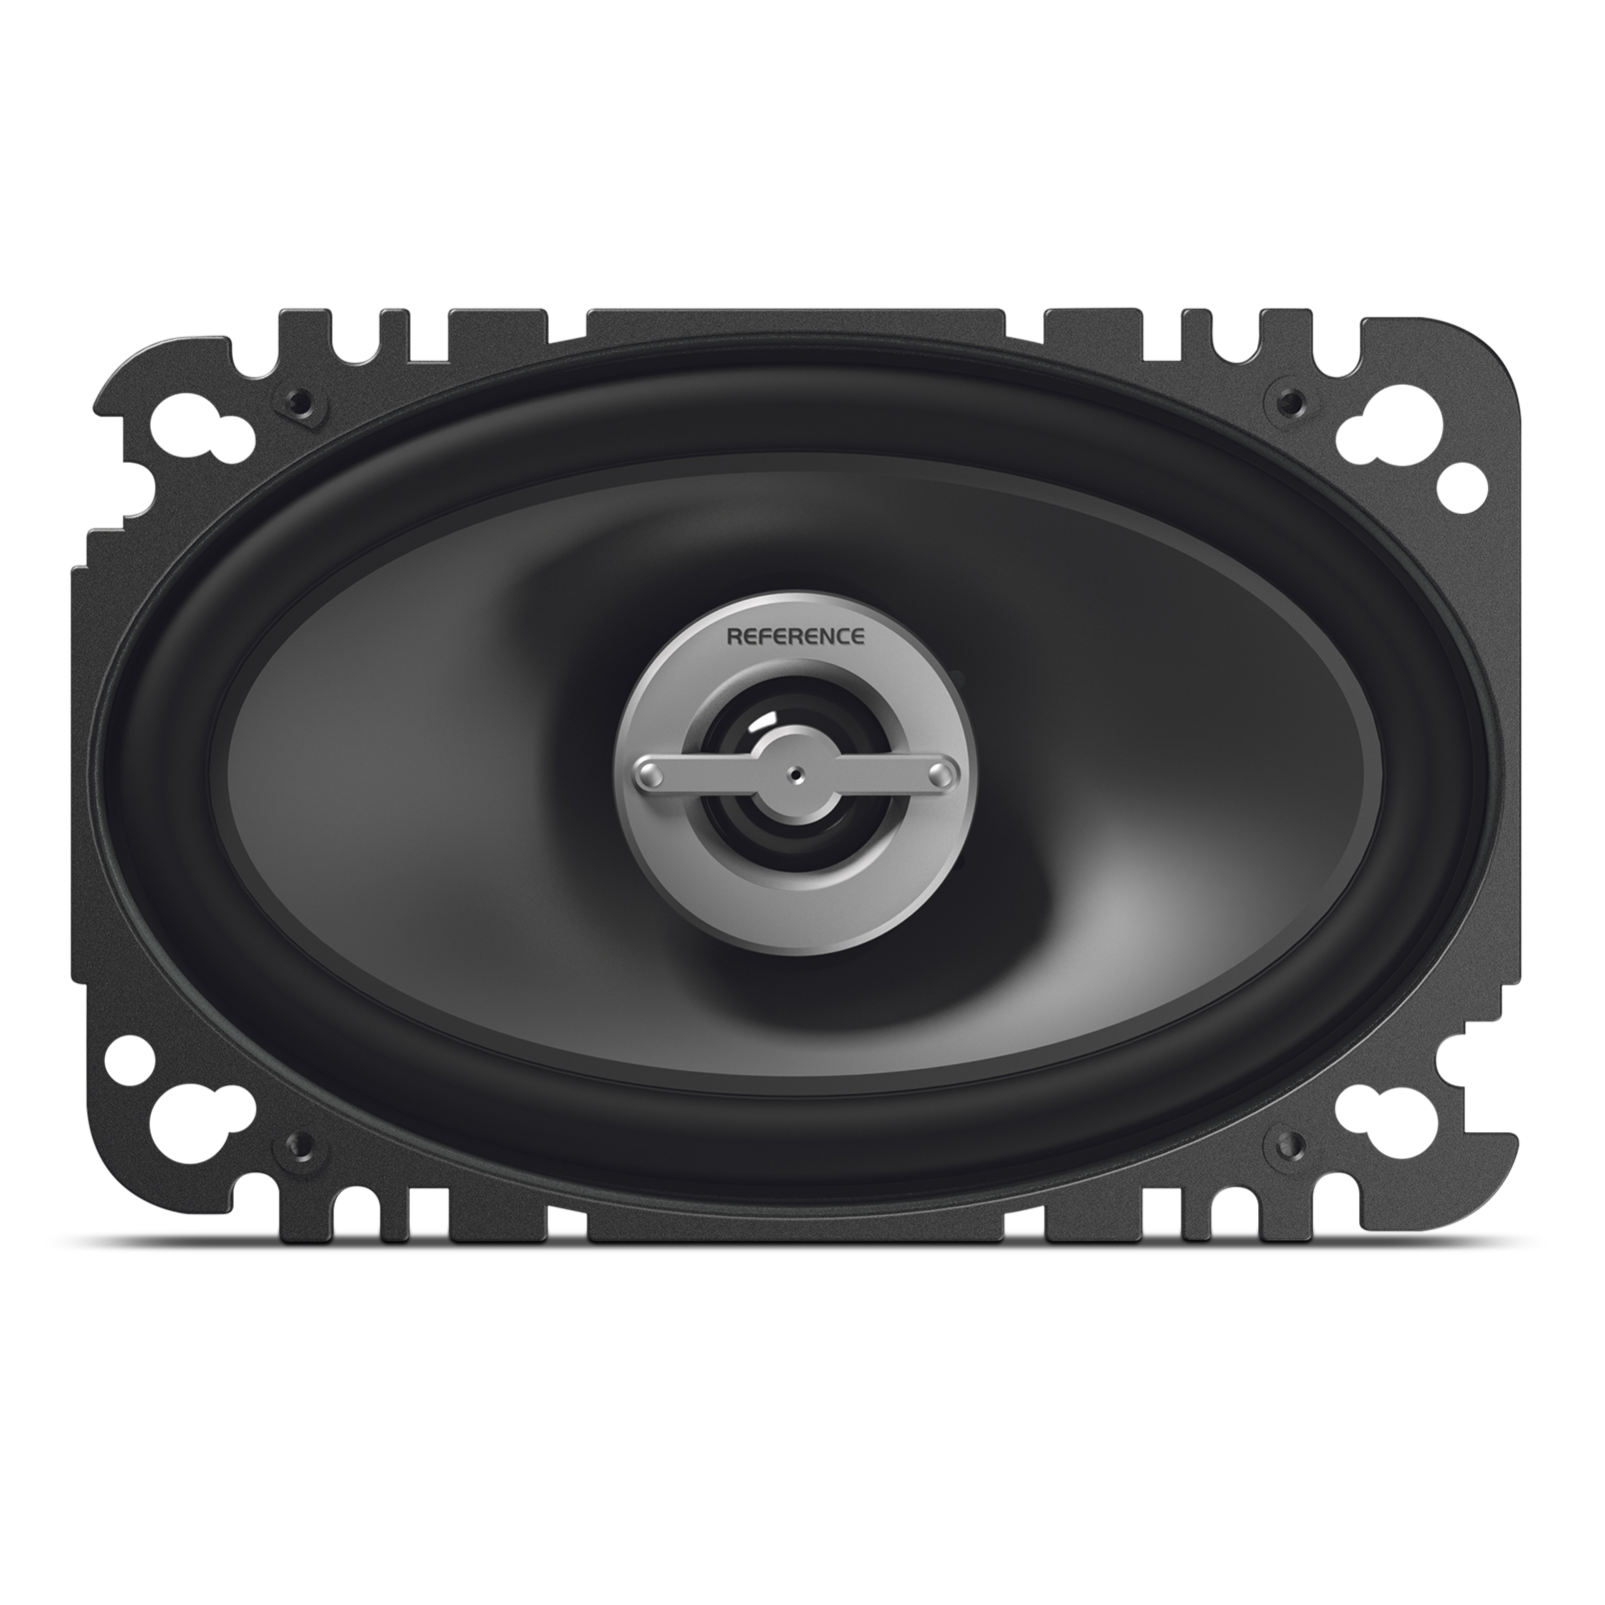 Reference 6402cfx - Black - A 4" x 6", custom-fit, two-way, high-fidelity coaxial speaker with true 4-ohm technology - Front